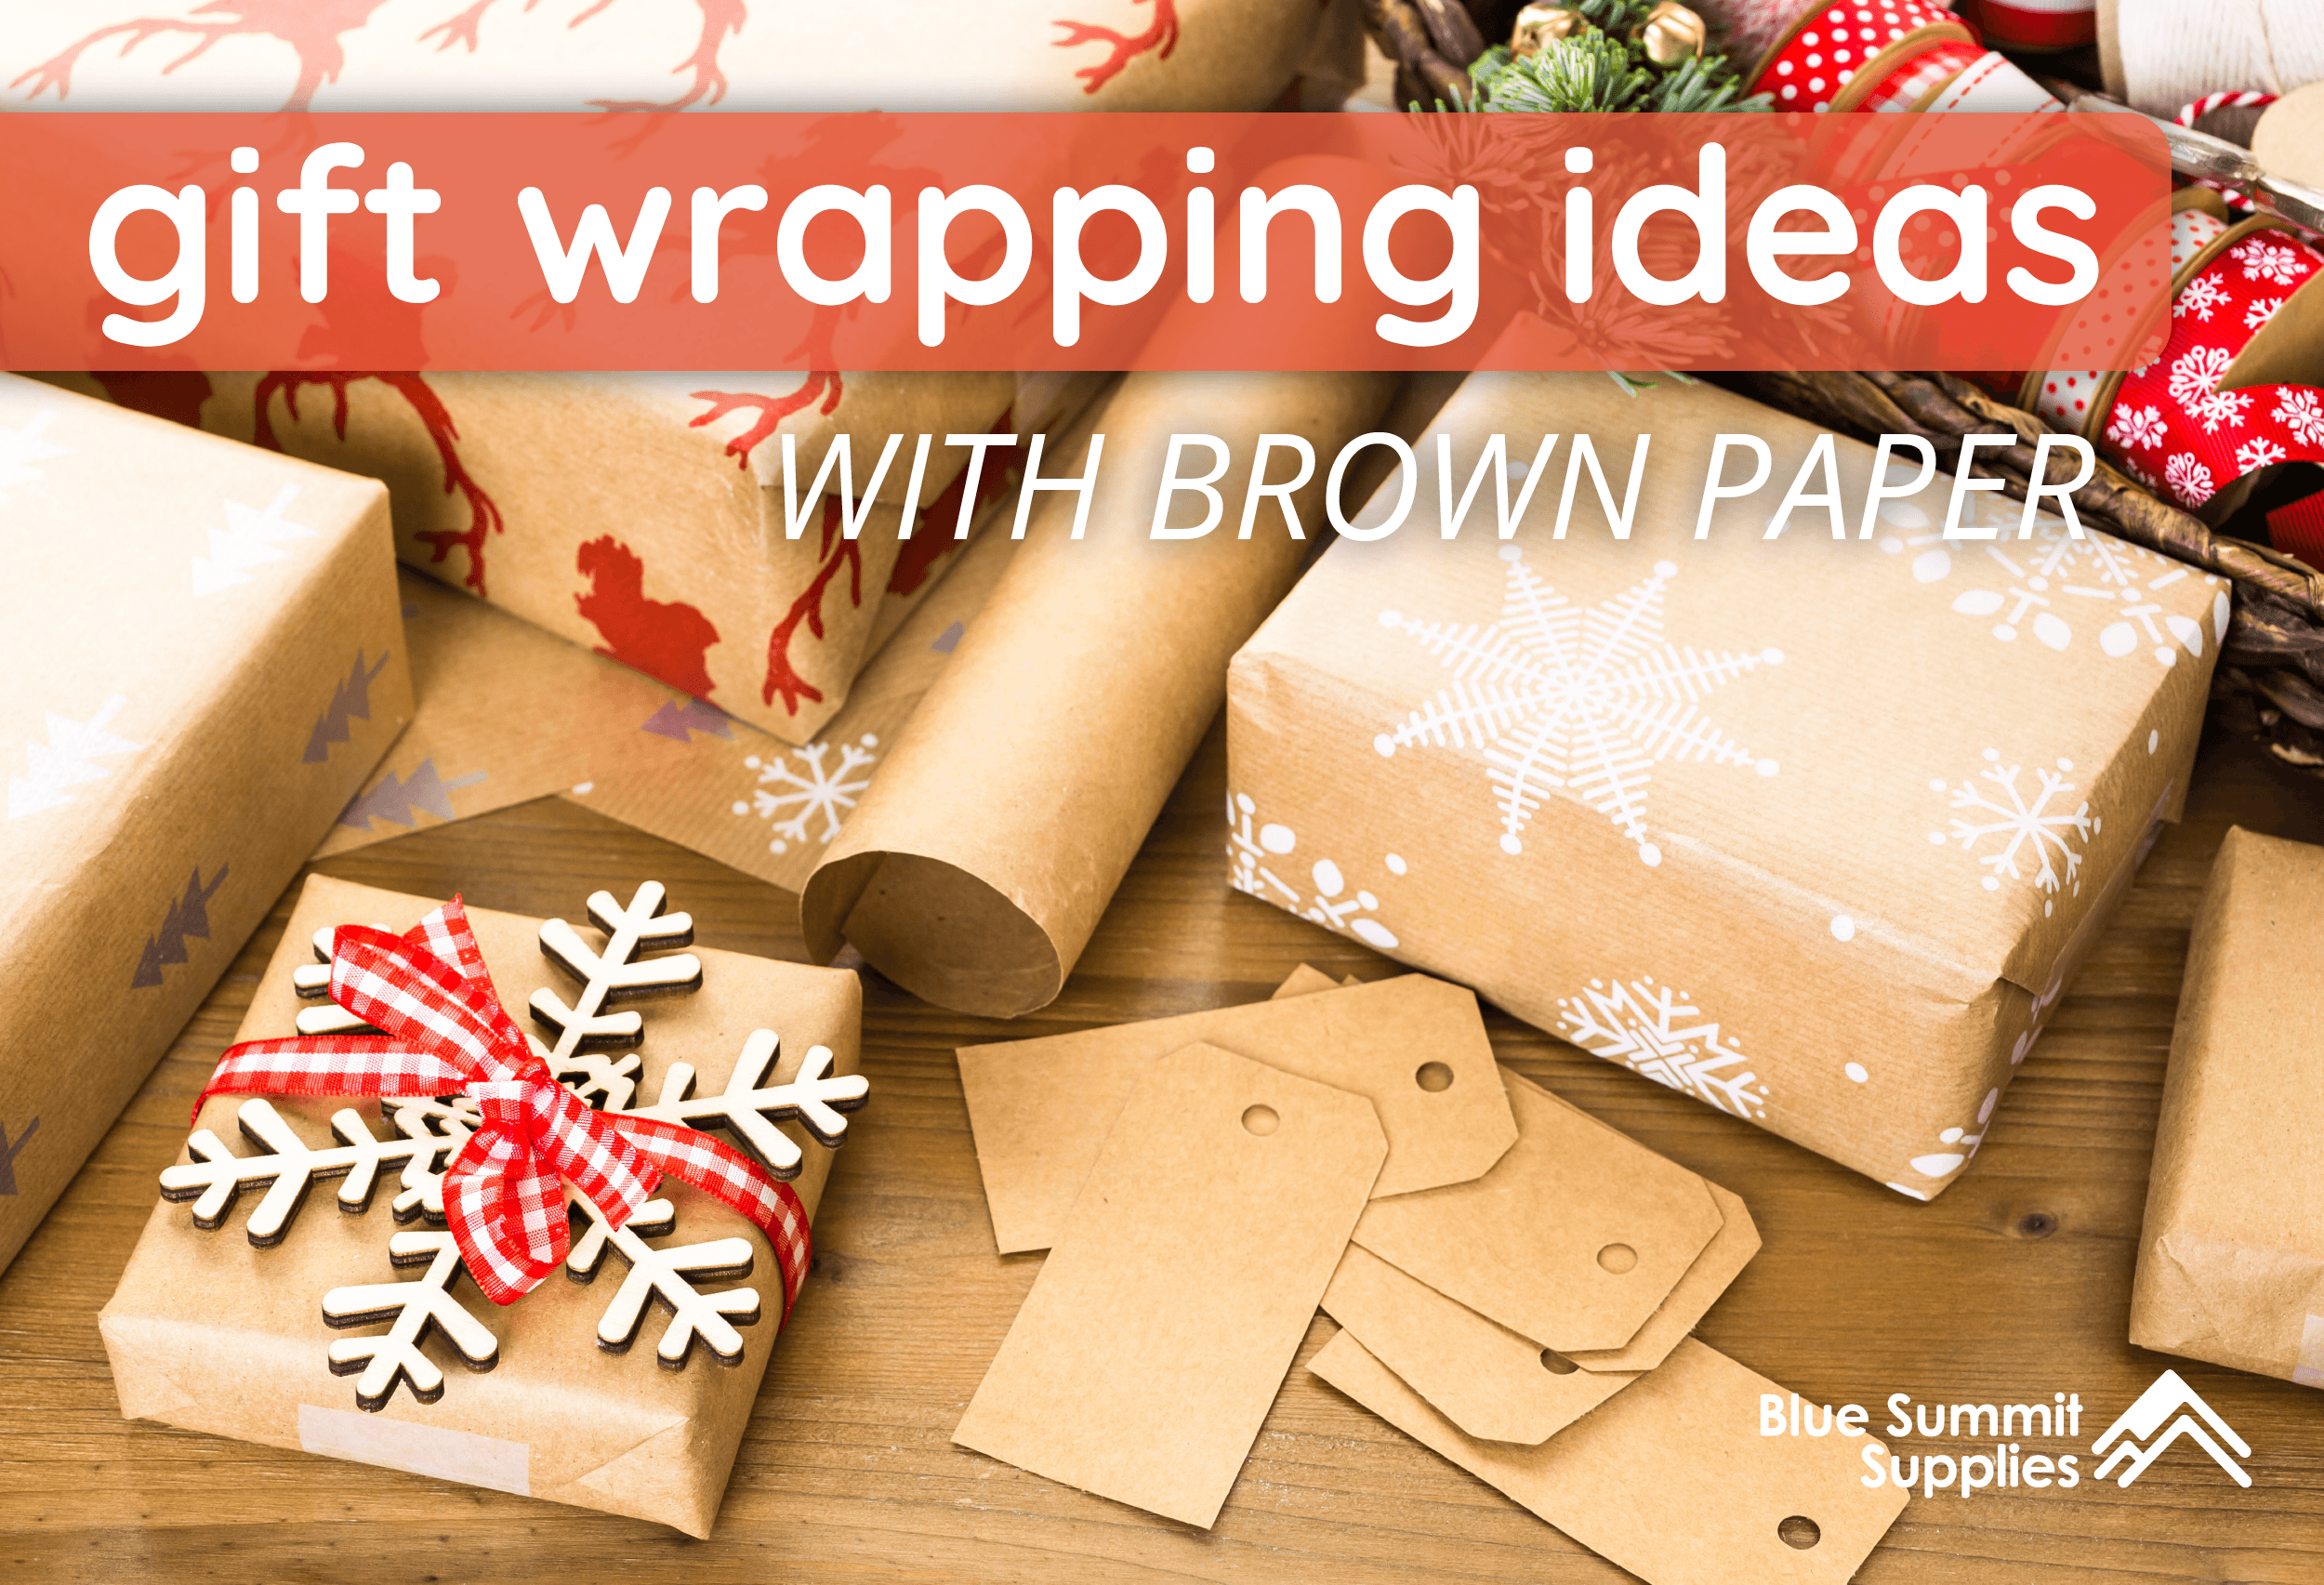 Plain brown wrapping paper